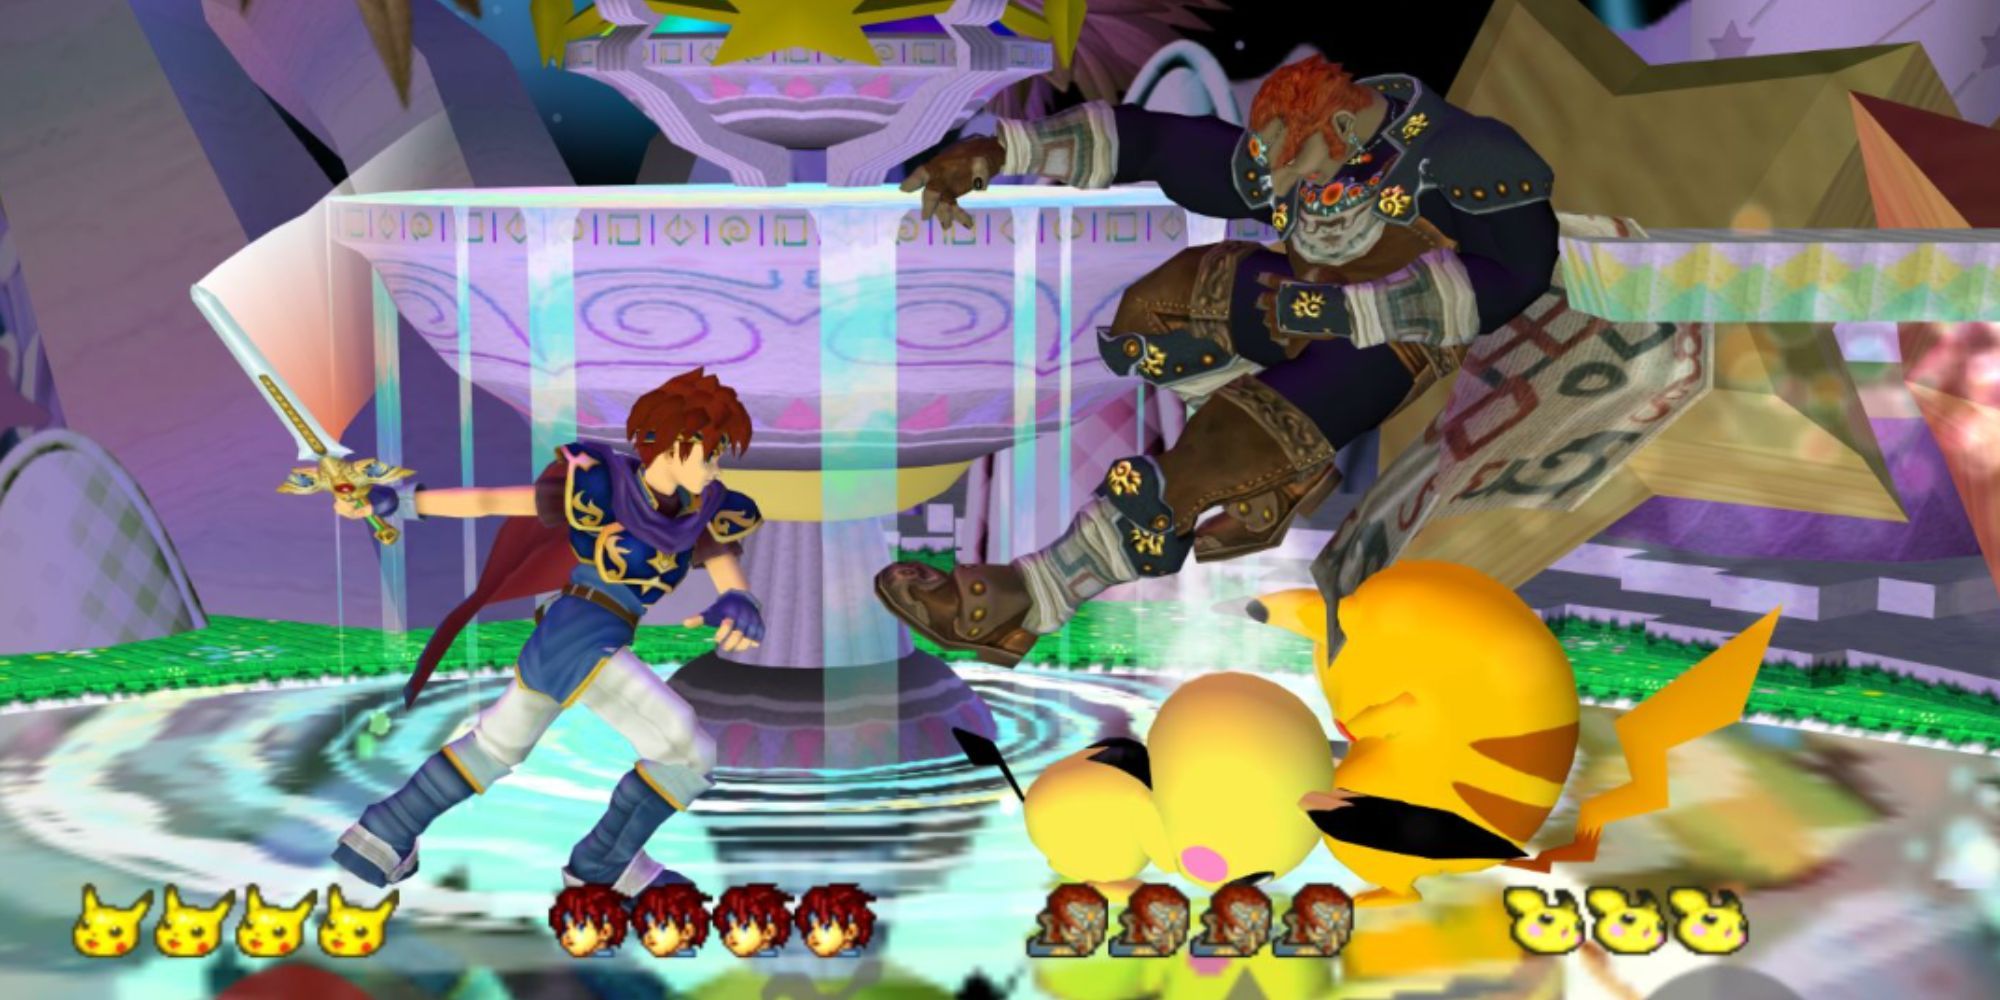 Four characters fighting in Super Smash Bros. Melee